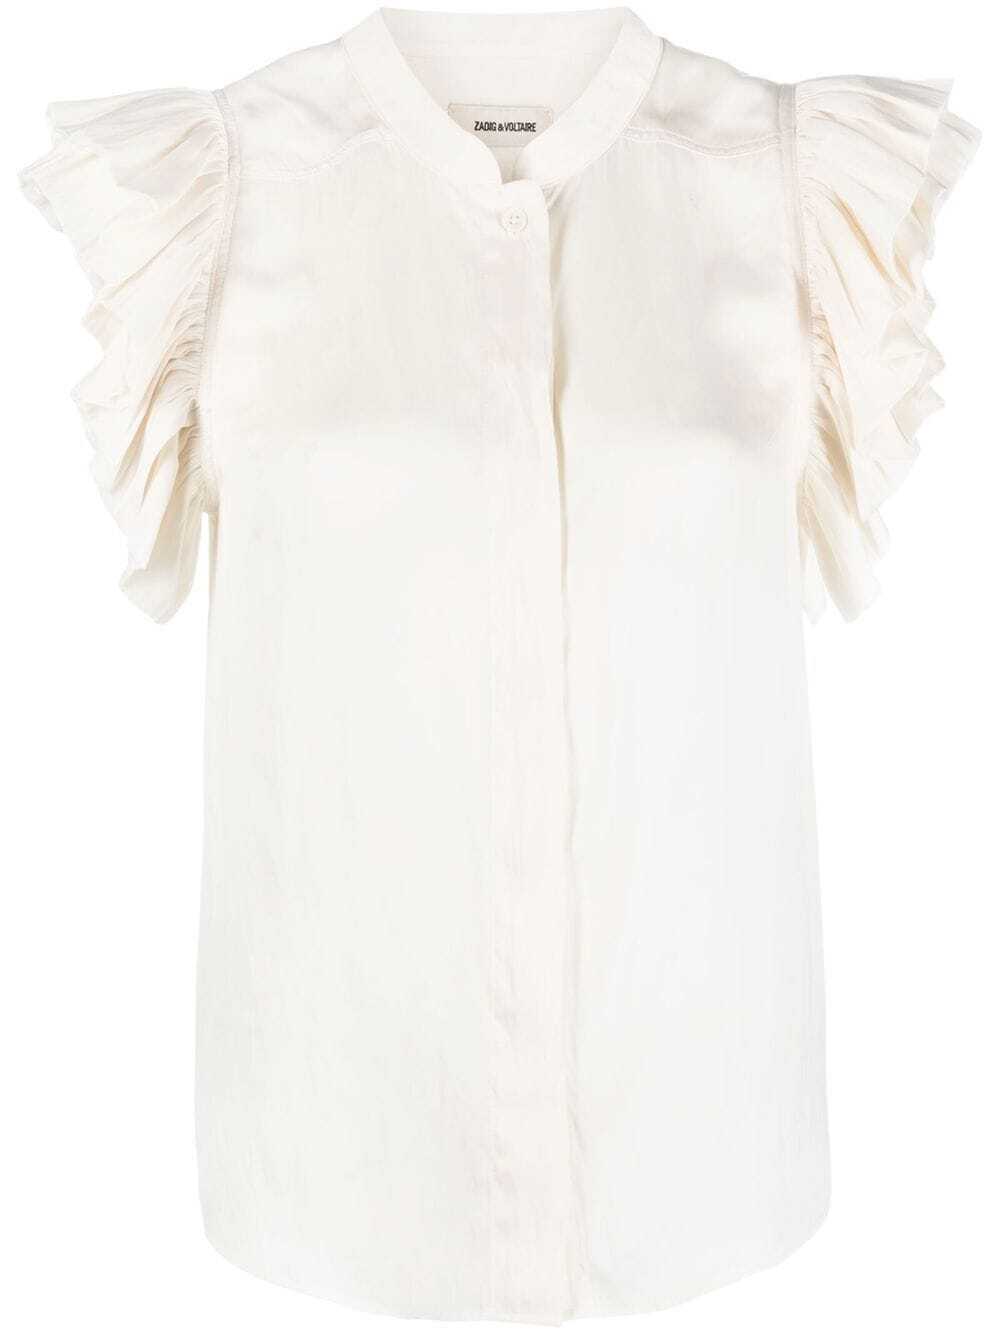 Zadig&Voltaire ruffled-sleeve blouse - Neutrals